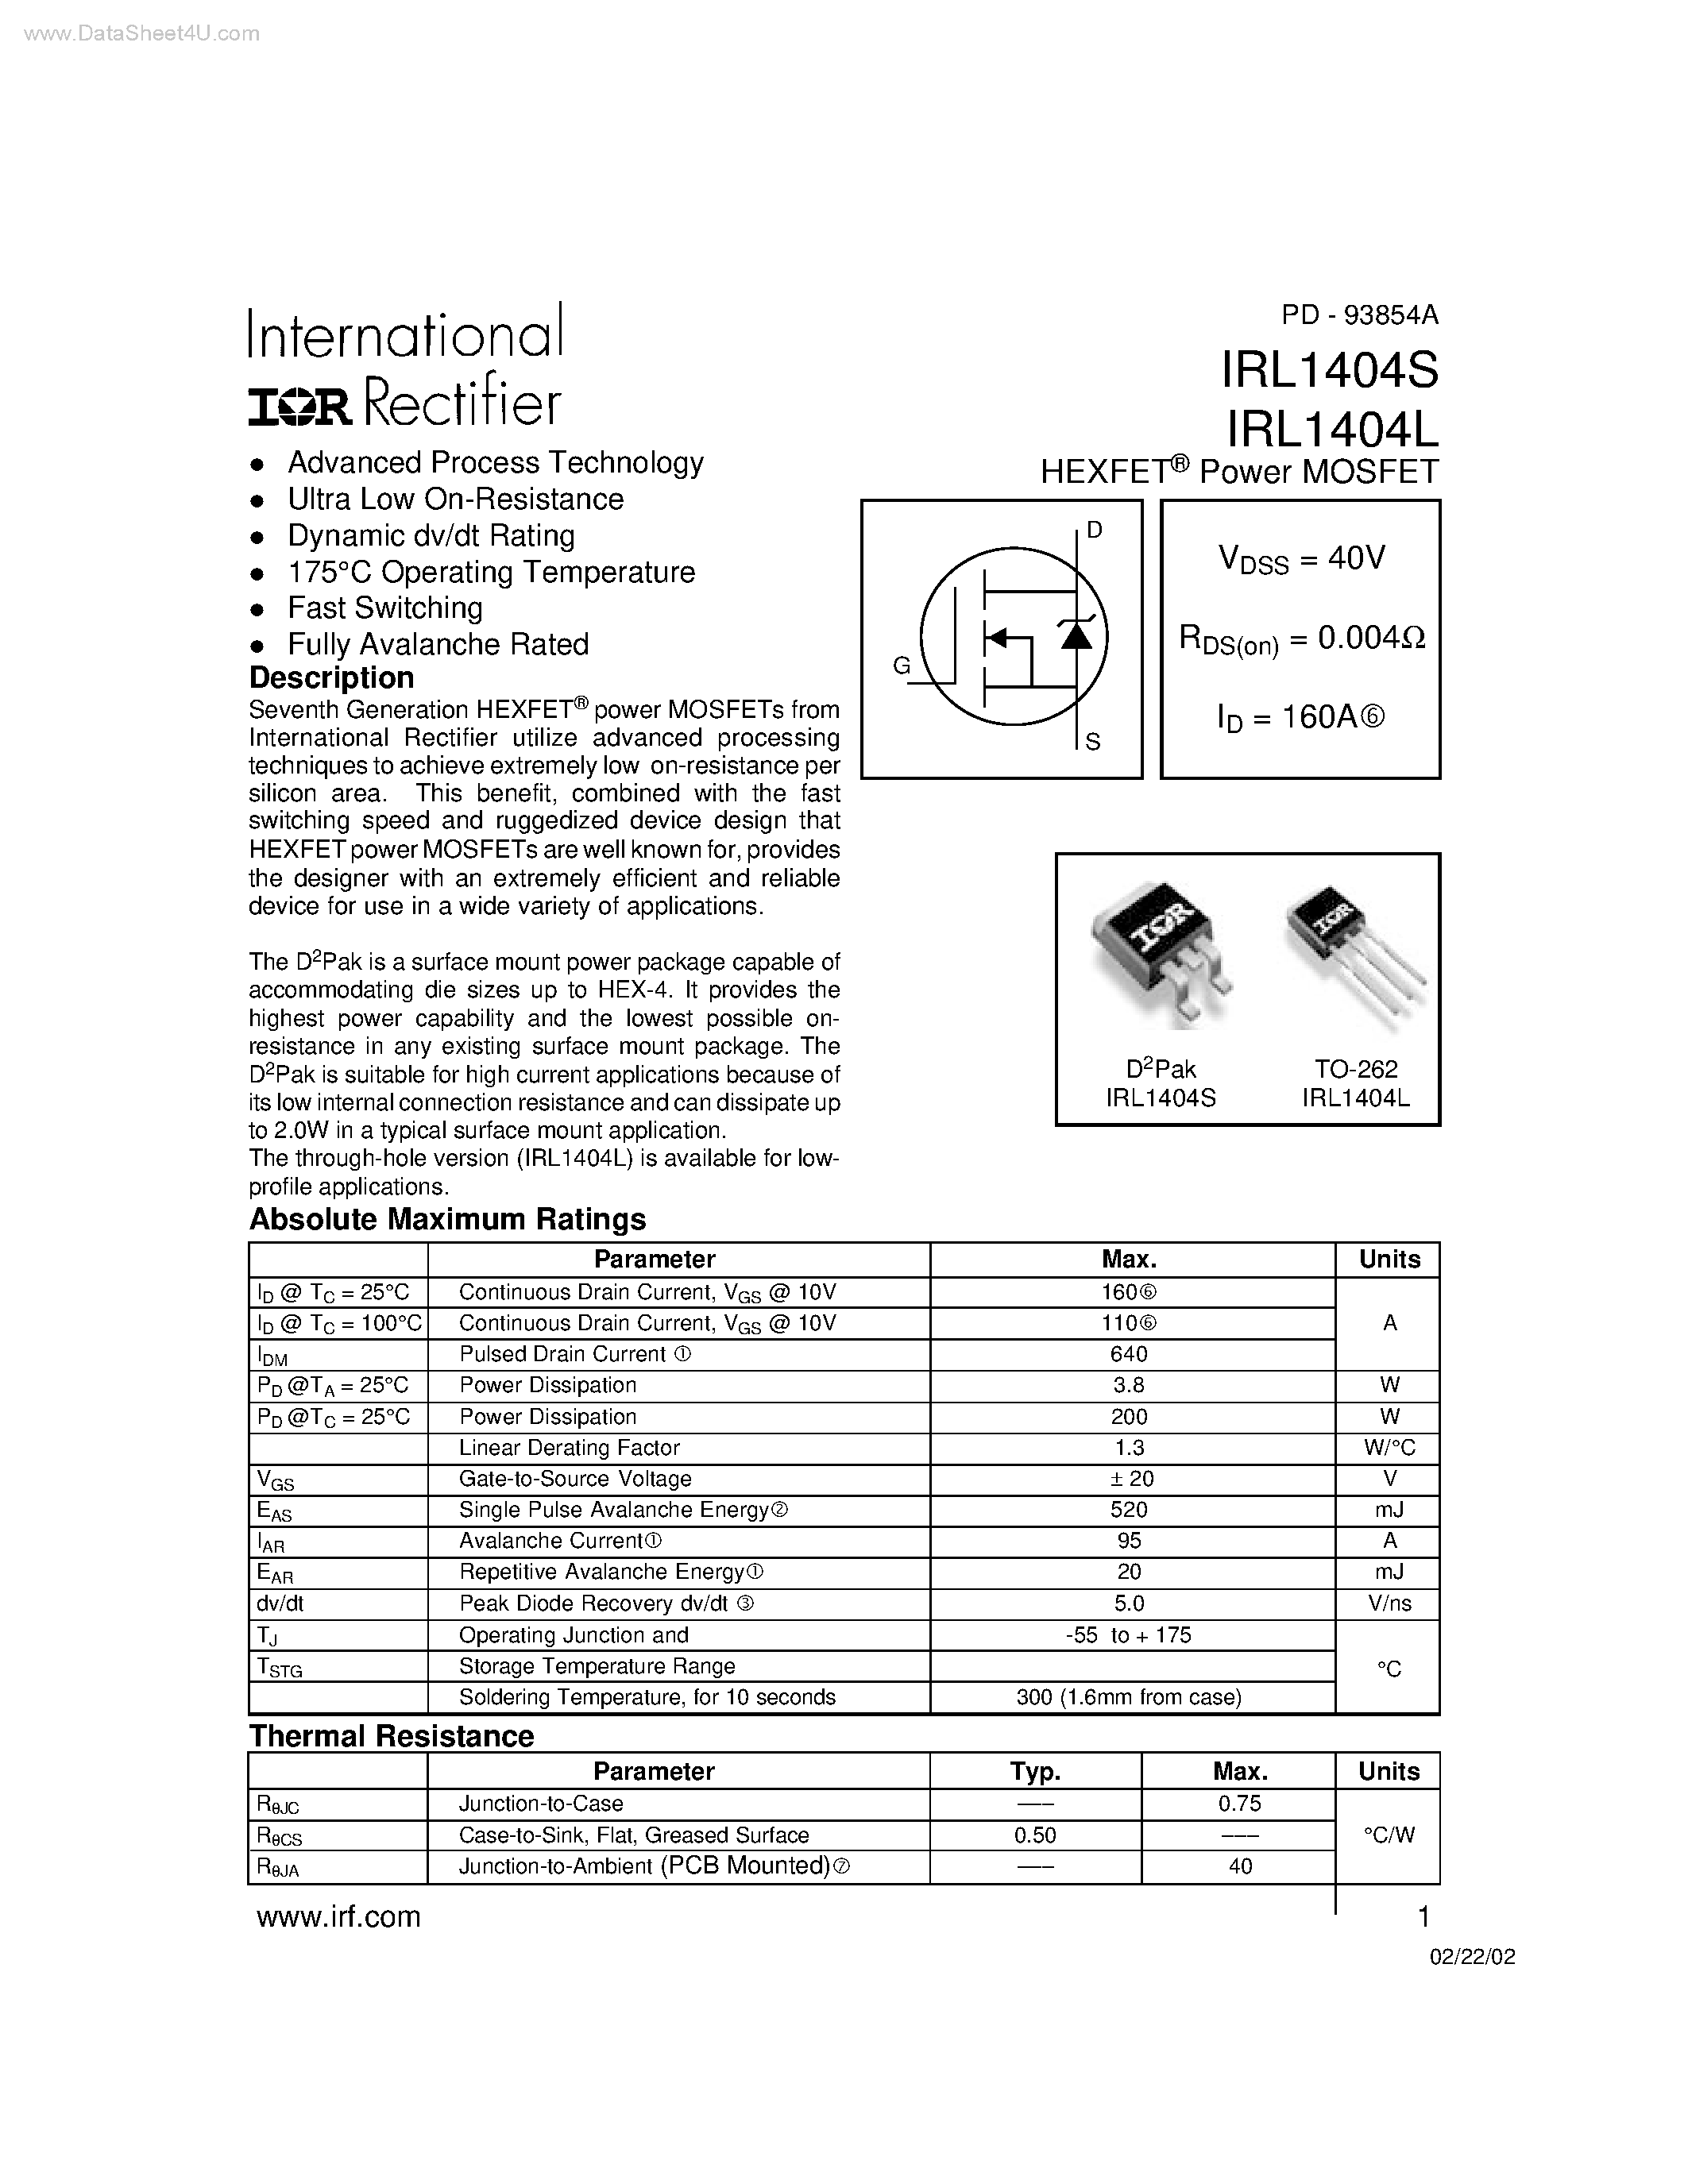 Datasheet IRL1404L - HEXFET-R Power MOSFET page 1